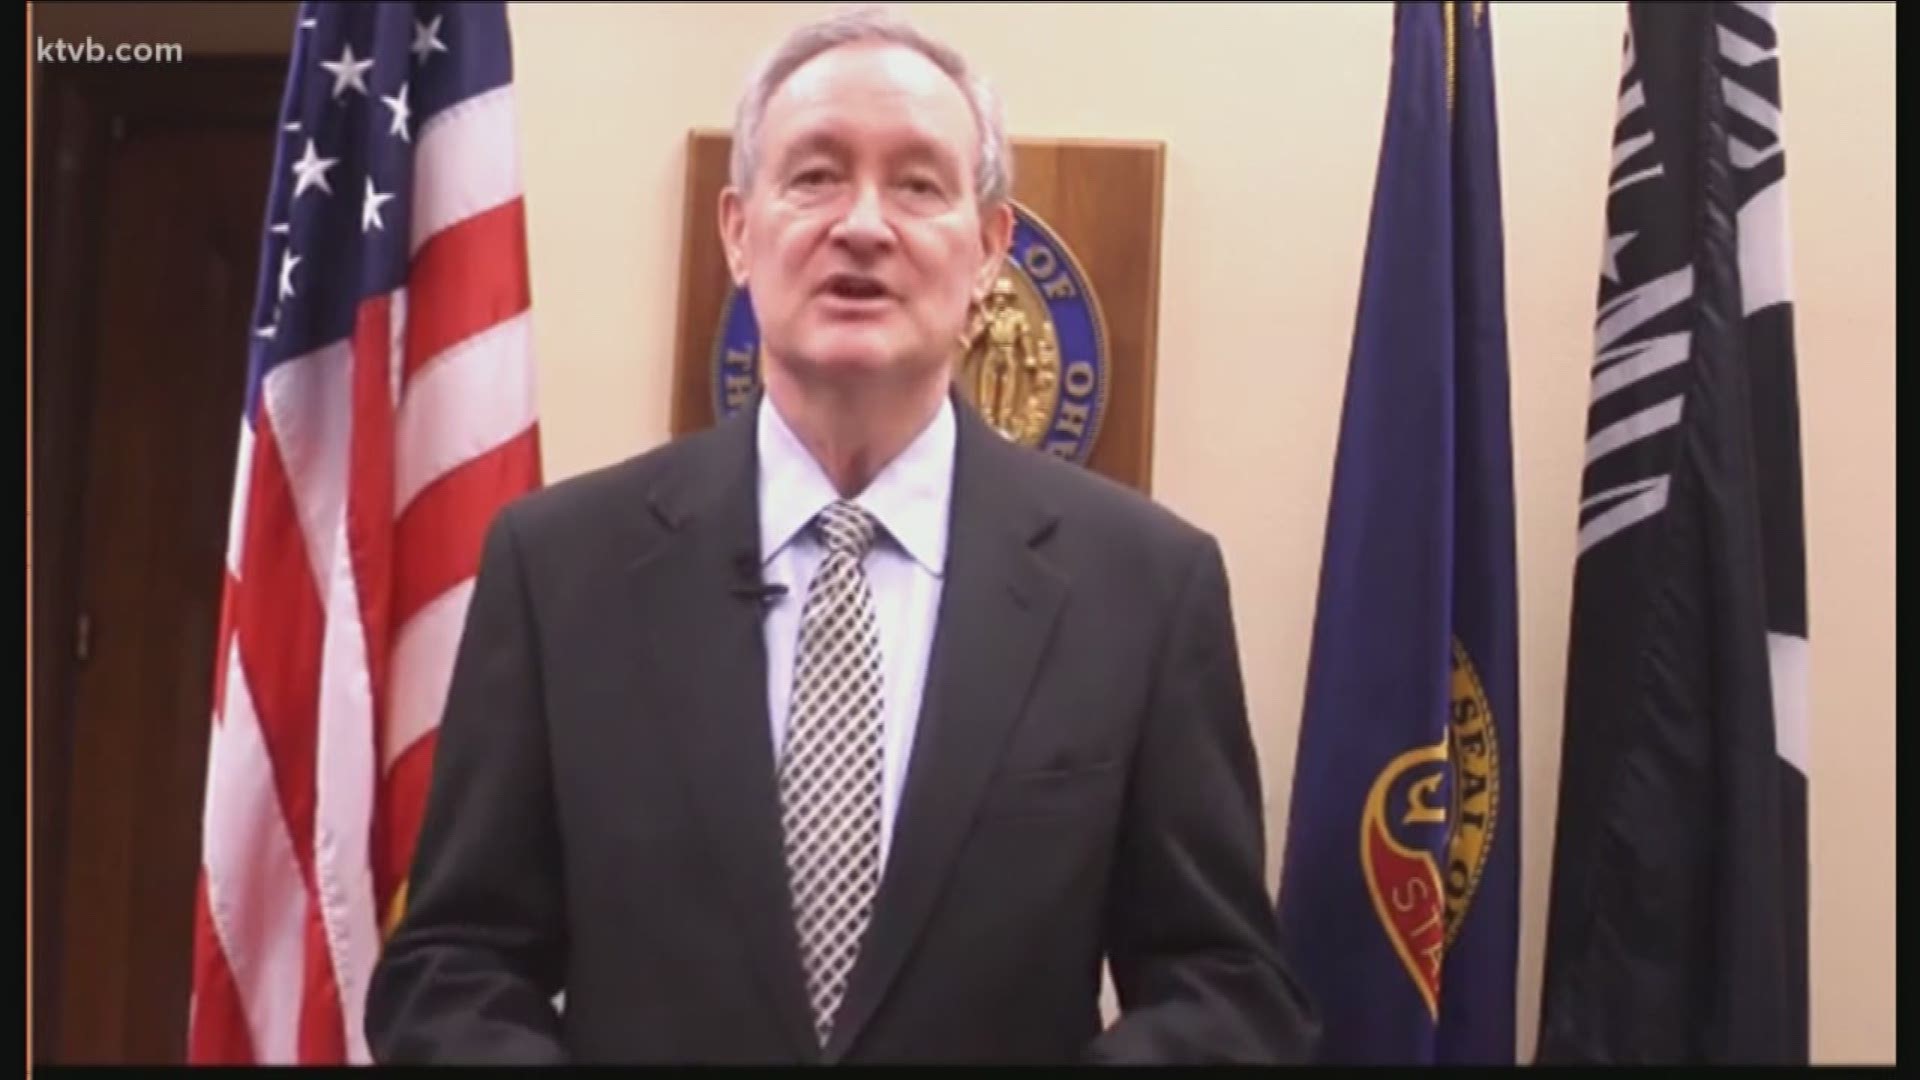 Idaho's congressman gave their thoughts on the president's second State of the Union address.